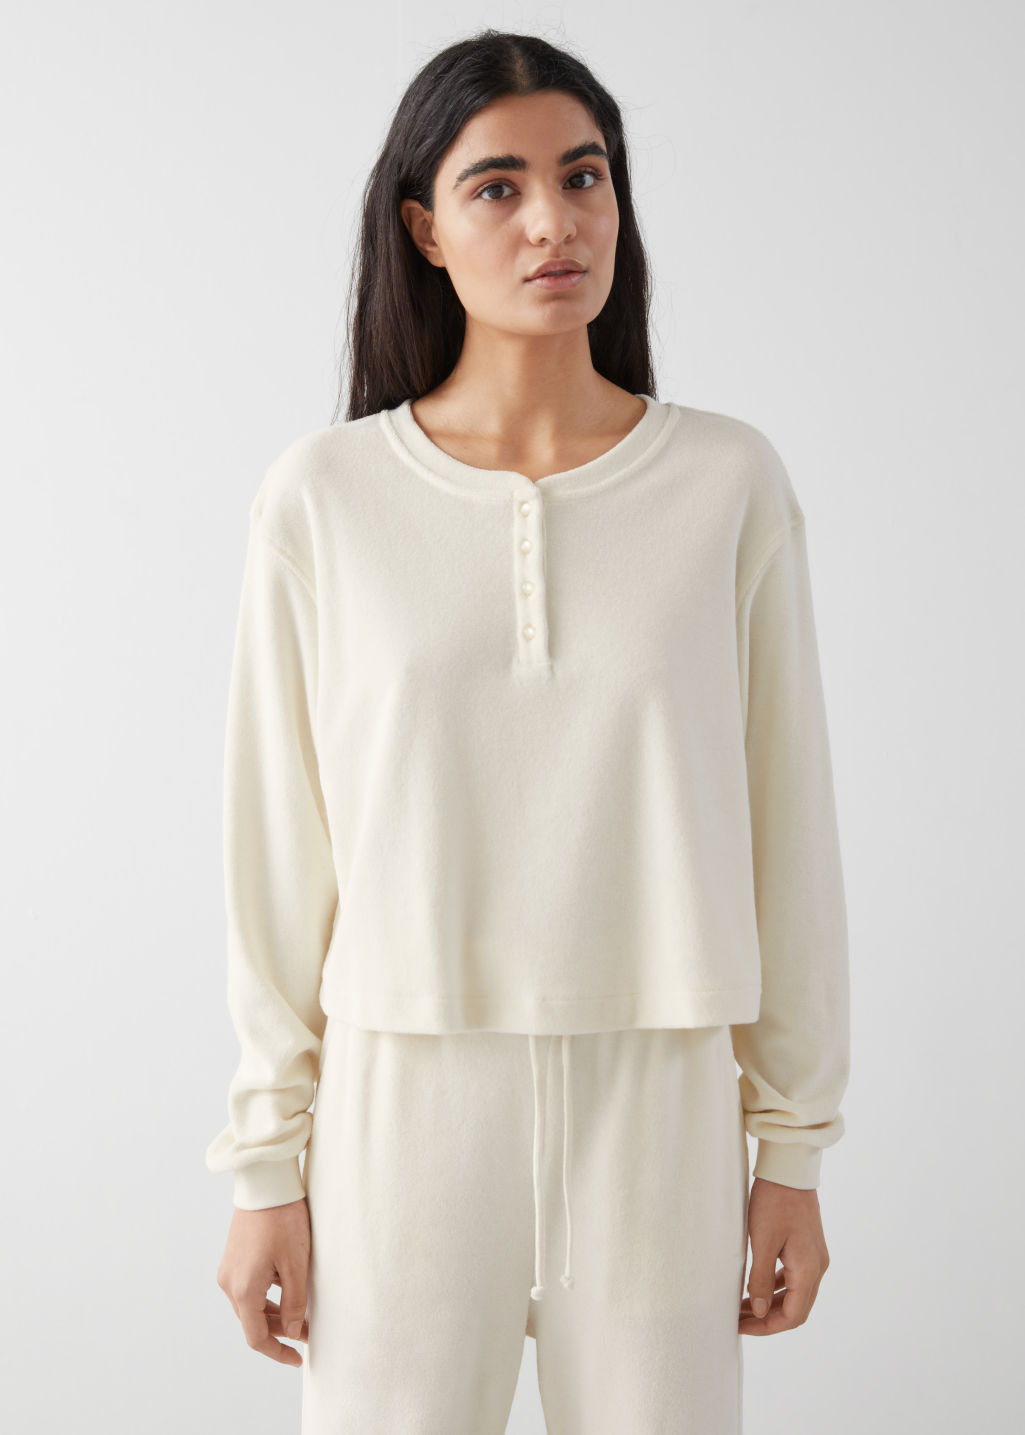 Boxy Pearl Button Top - White - Sweatshirts & Hoodies - & Other Stories